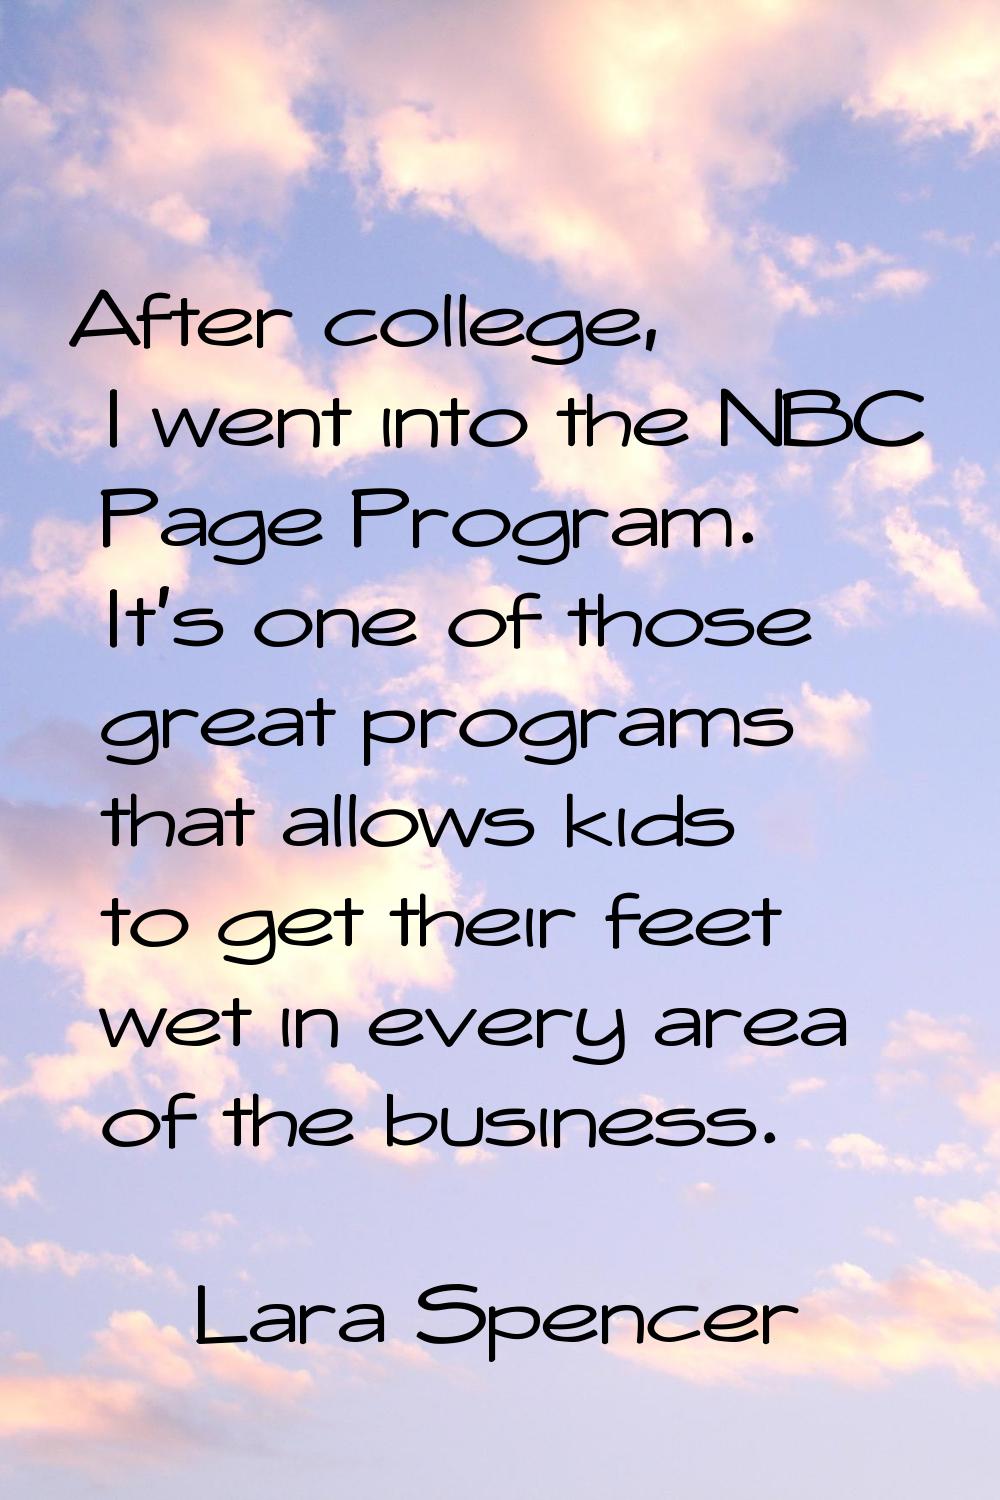 After college, I went into the NBC Page Program. It's one of those great programs that allows kids 